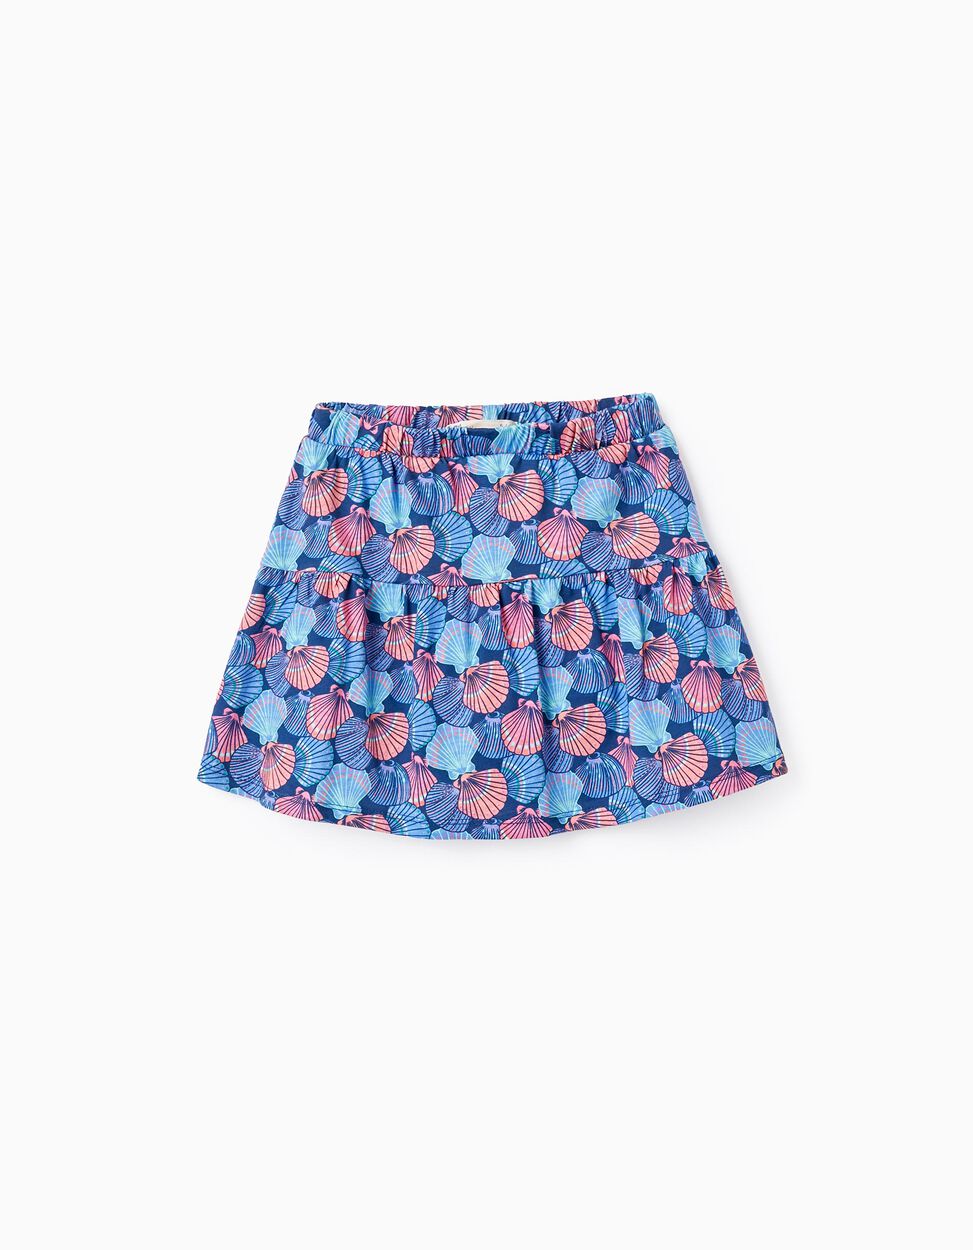 Buy Online Printed Skirt with Built-in Shorts for Girls, Blue/Coral